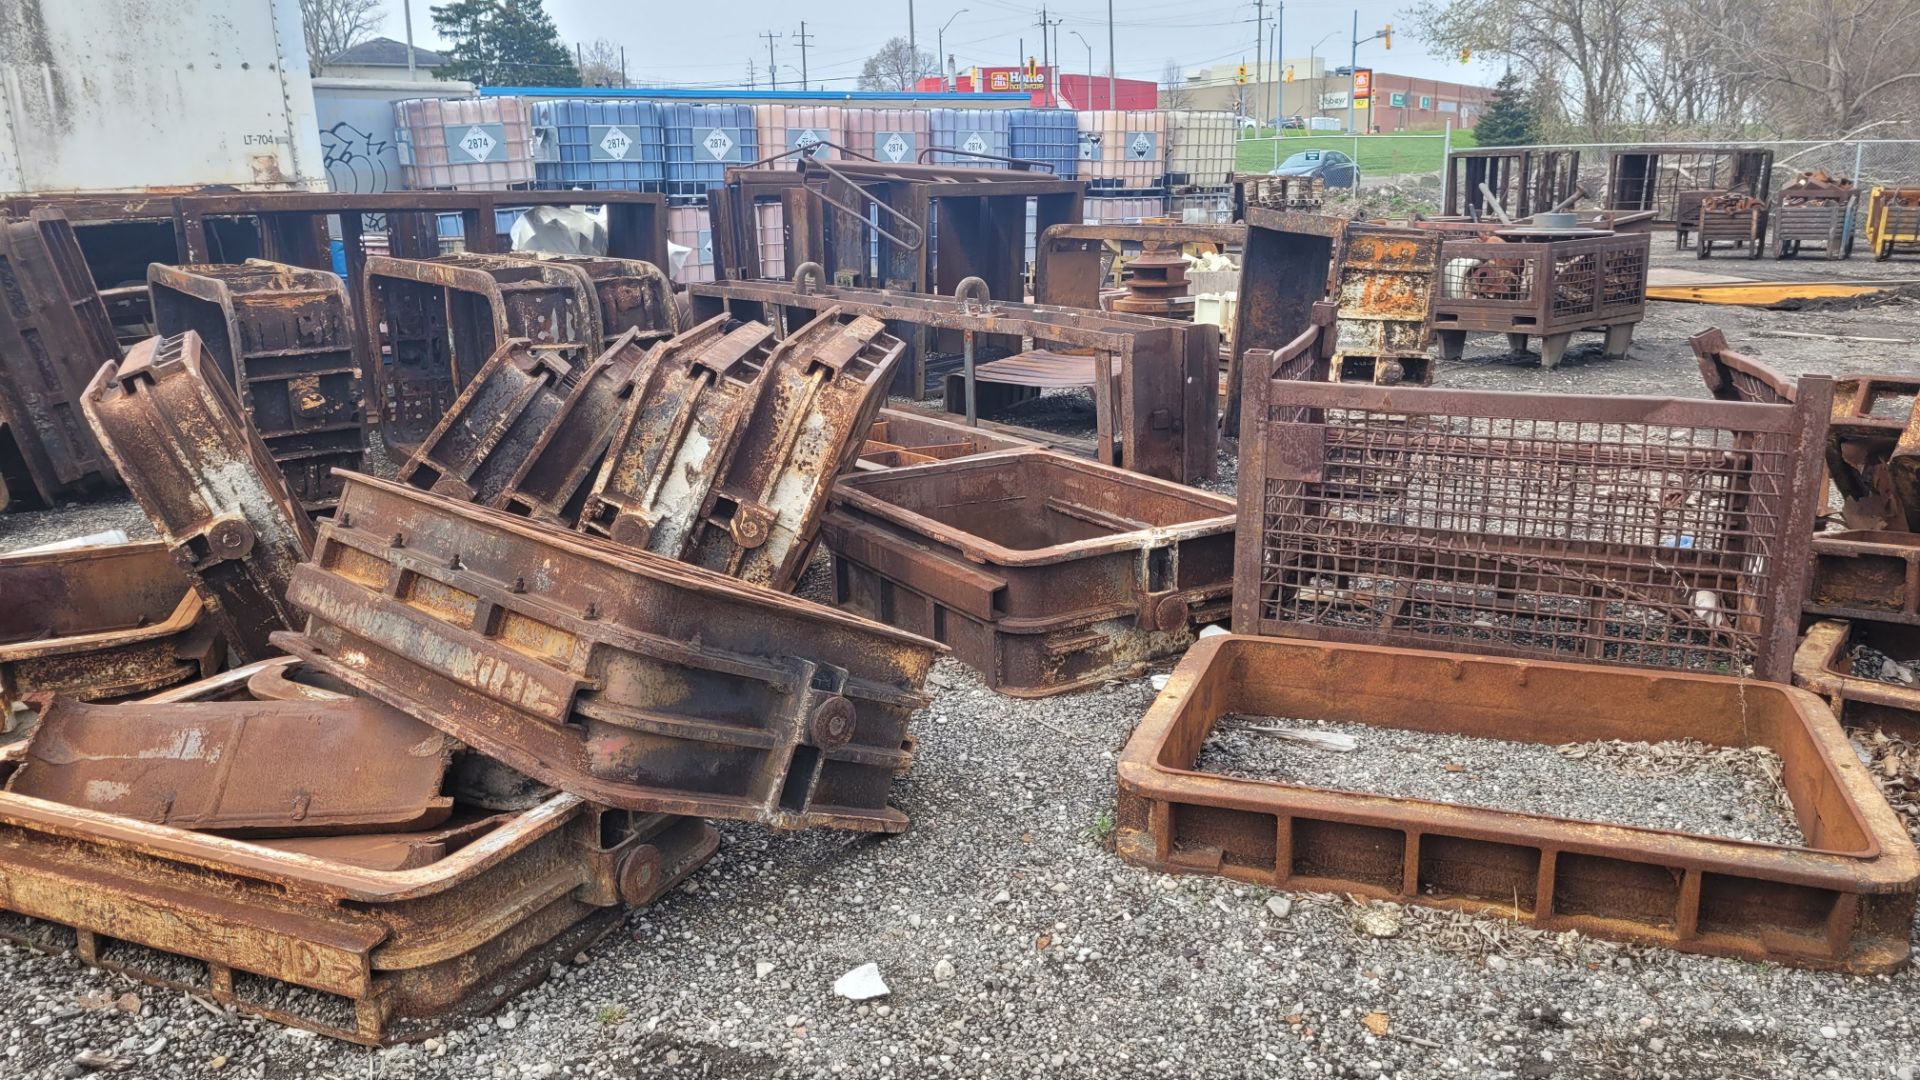 LOT - LARGE ASSORTMENT OF STEEL MOULD BOXES, BASKETS, PIPES, RODS, RACKS, LADELS, WALKWAYS, FLATS, - Image 33 of 34